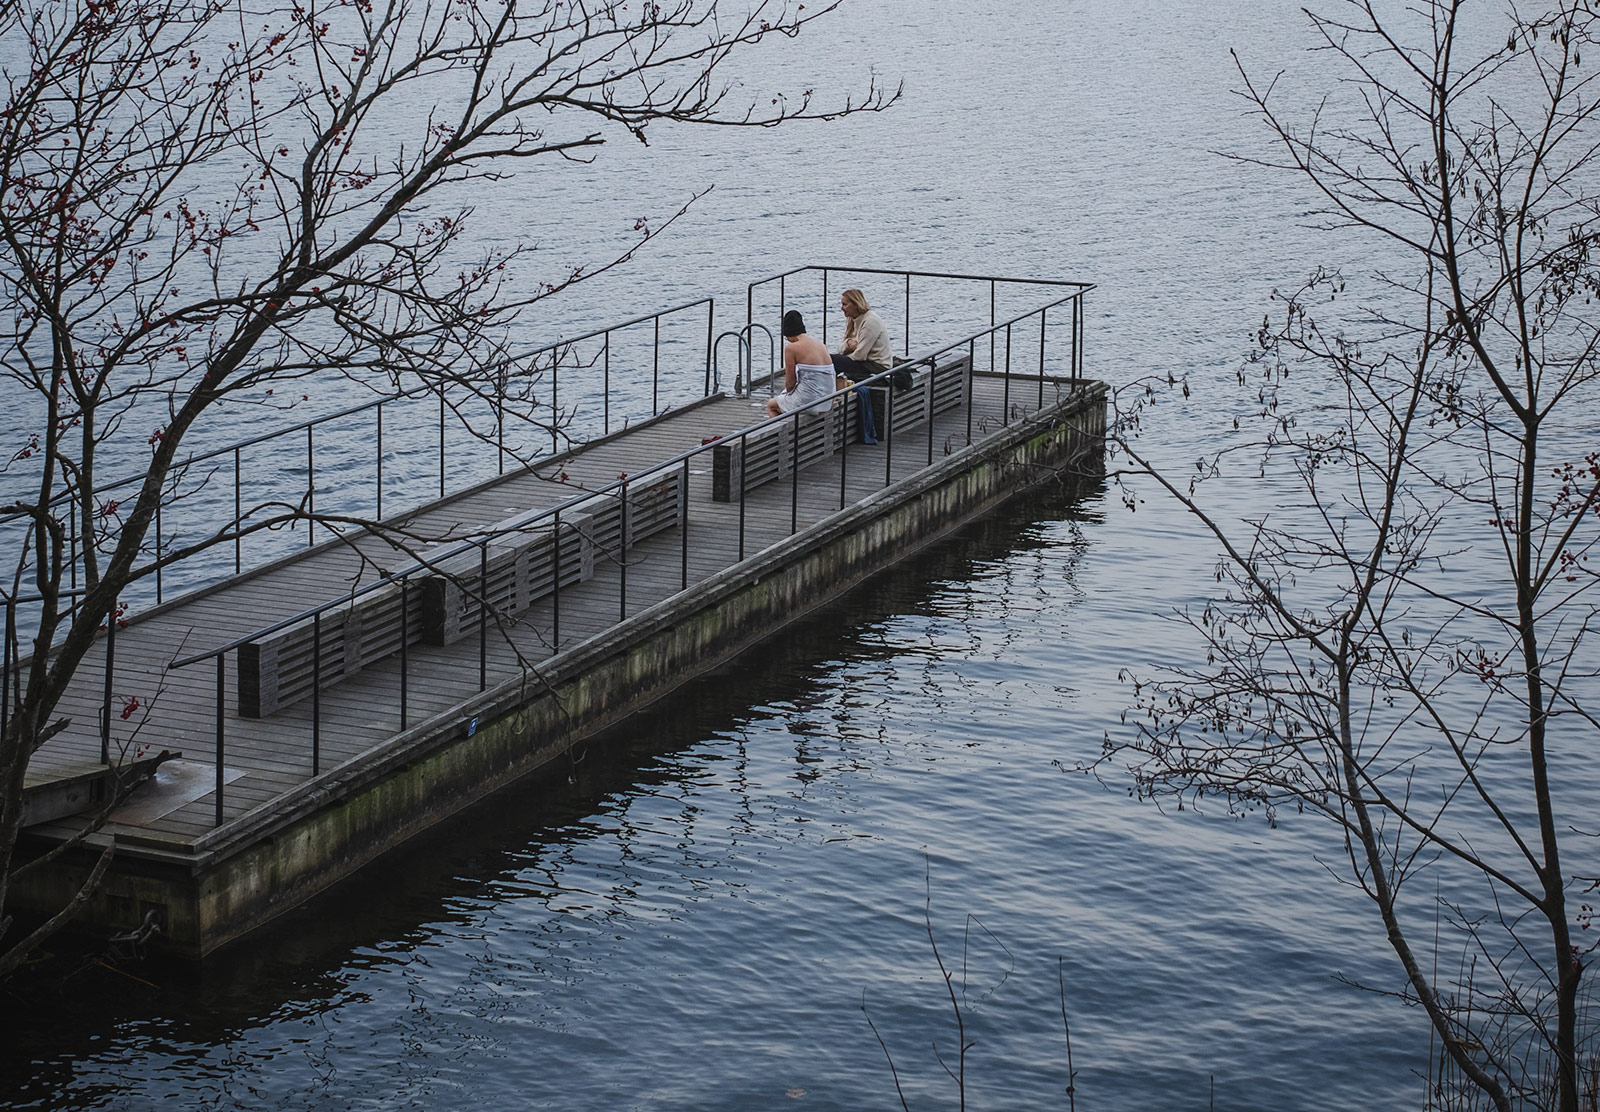 Swimmers sat on jetty